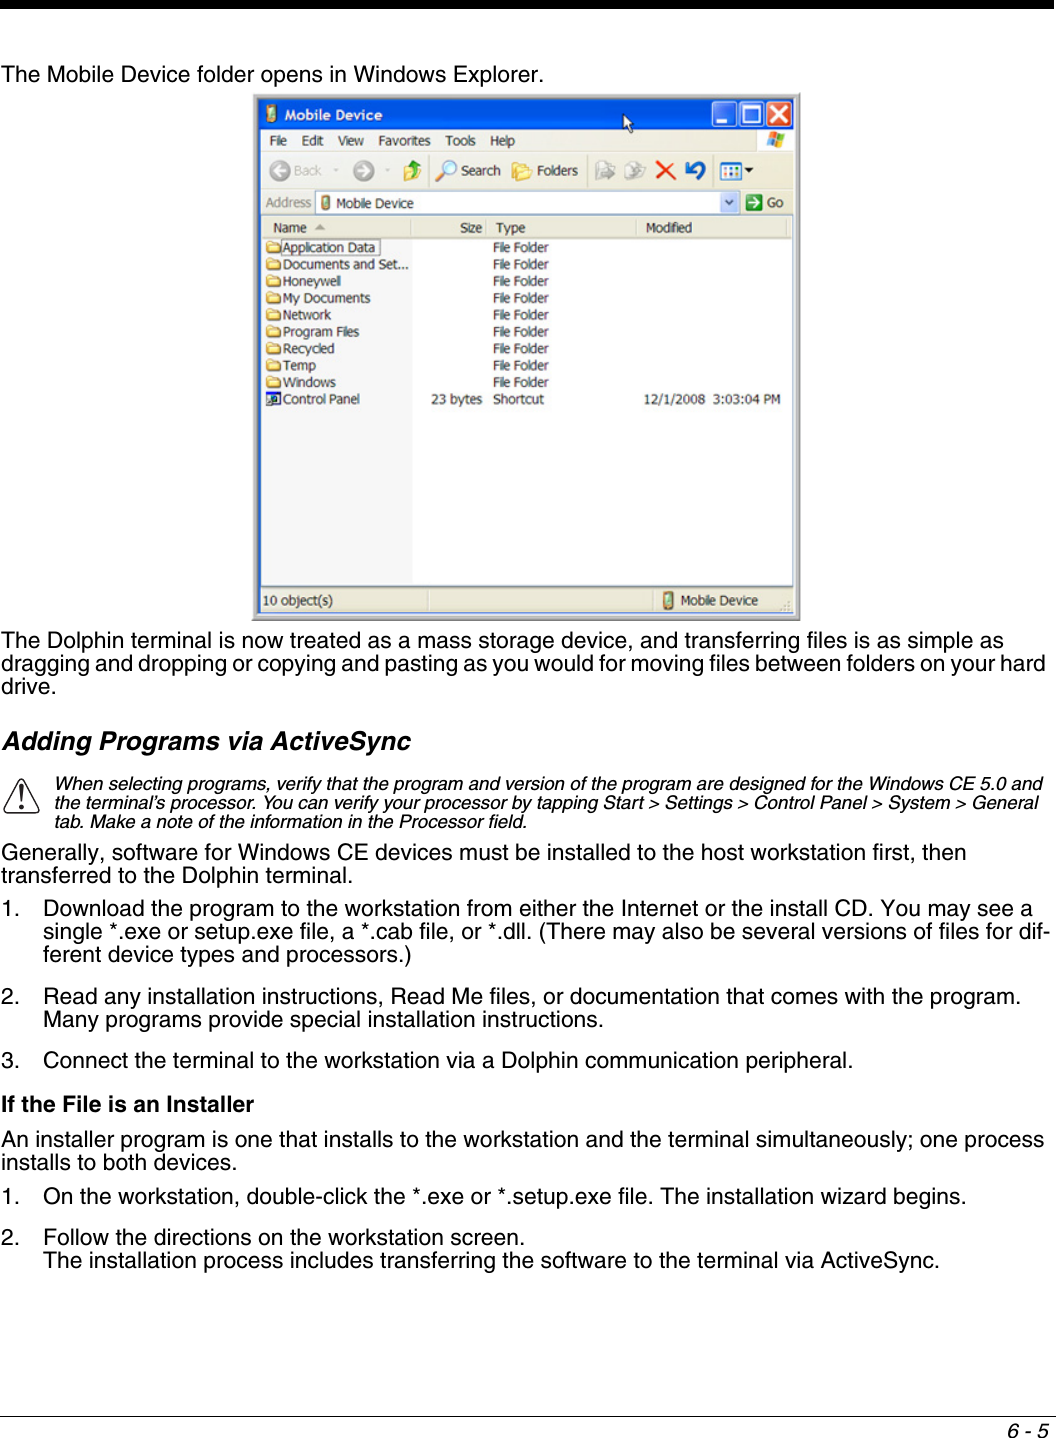 6 - 5The Mobile Device folder opens in Windows Explorer. The Dolphin terminal is now treated as a mass storage device, and transferring files is as simple as dragging and dropping or copying and pasting as you would for moving files between folders on your hard drive.Adding Programs via ActiveSyncWhen selecting programs, verify that the program and version of the program are designed for the Windows CE 5.0 and the terminal’s processor. You can verify your processor by tapping Start &gt; Settings &gt; Control Panel &gt; System &gt; General tab. Make a note of the information in the Processor field. Generally, software for Windows CE devices must be installed to the host workstation first, then transferred to the Dolphin terminal. 1. Download the program to the workstation from either the Internet or the install CD. You may see a single *.exe or setup.exe file, a *.cab file, or *.dll. (There may also be several versions of files for dif-ferent device types and processors.)2. Read any installation instructions, Read Me files, or documentation that comes with the program. Many programs provide special installation instructions.3. Connect the terminal to the workstation via a Dolphin communication peripheral.If the File is an InstallerAn installer program is one that installs to the workstation and the terminal simultaneously; one process installs to both devices.1. On the workstation, double-click the *.exe or *.setup.exe file. The installation wizard begins. 2. Follow the directions on the workstation screen. The installation process includes transferring the software to the terminal via ActiveSync. !